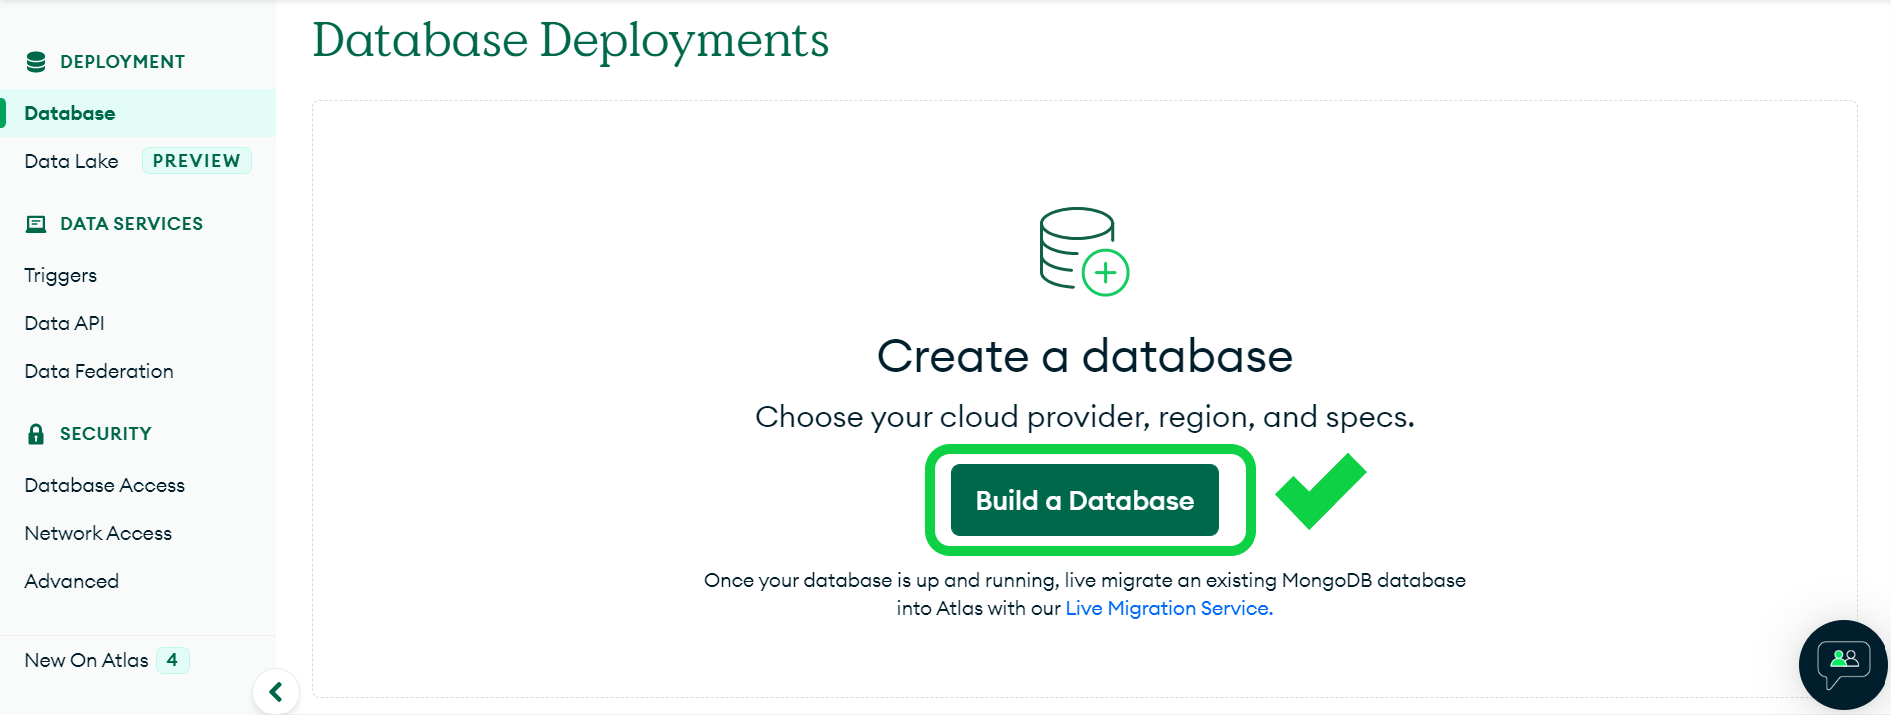 Build a database